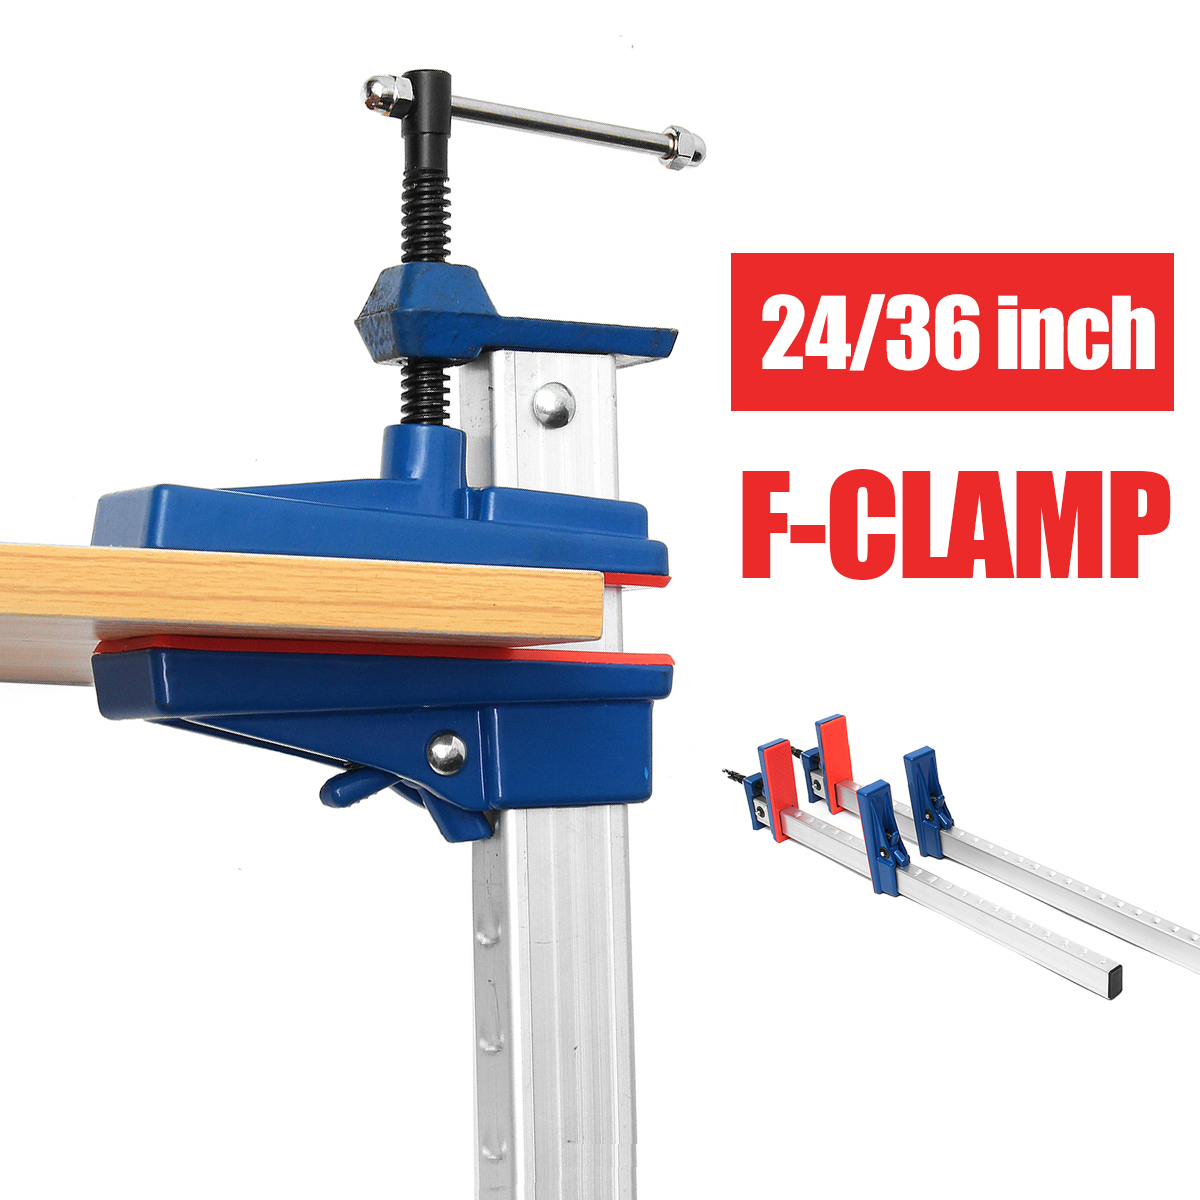 2436-Inch-Aluminum-F-Clamp-Bar-Heavy-Duty-Holder-Grip-Release-Parallel-Adjustable-Woodworking-Tool-1361735-3